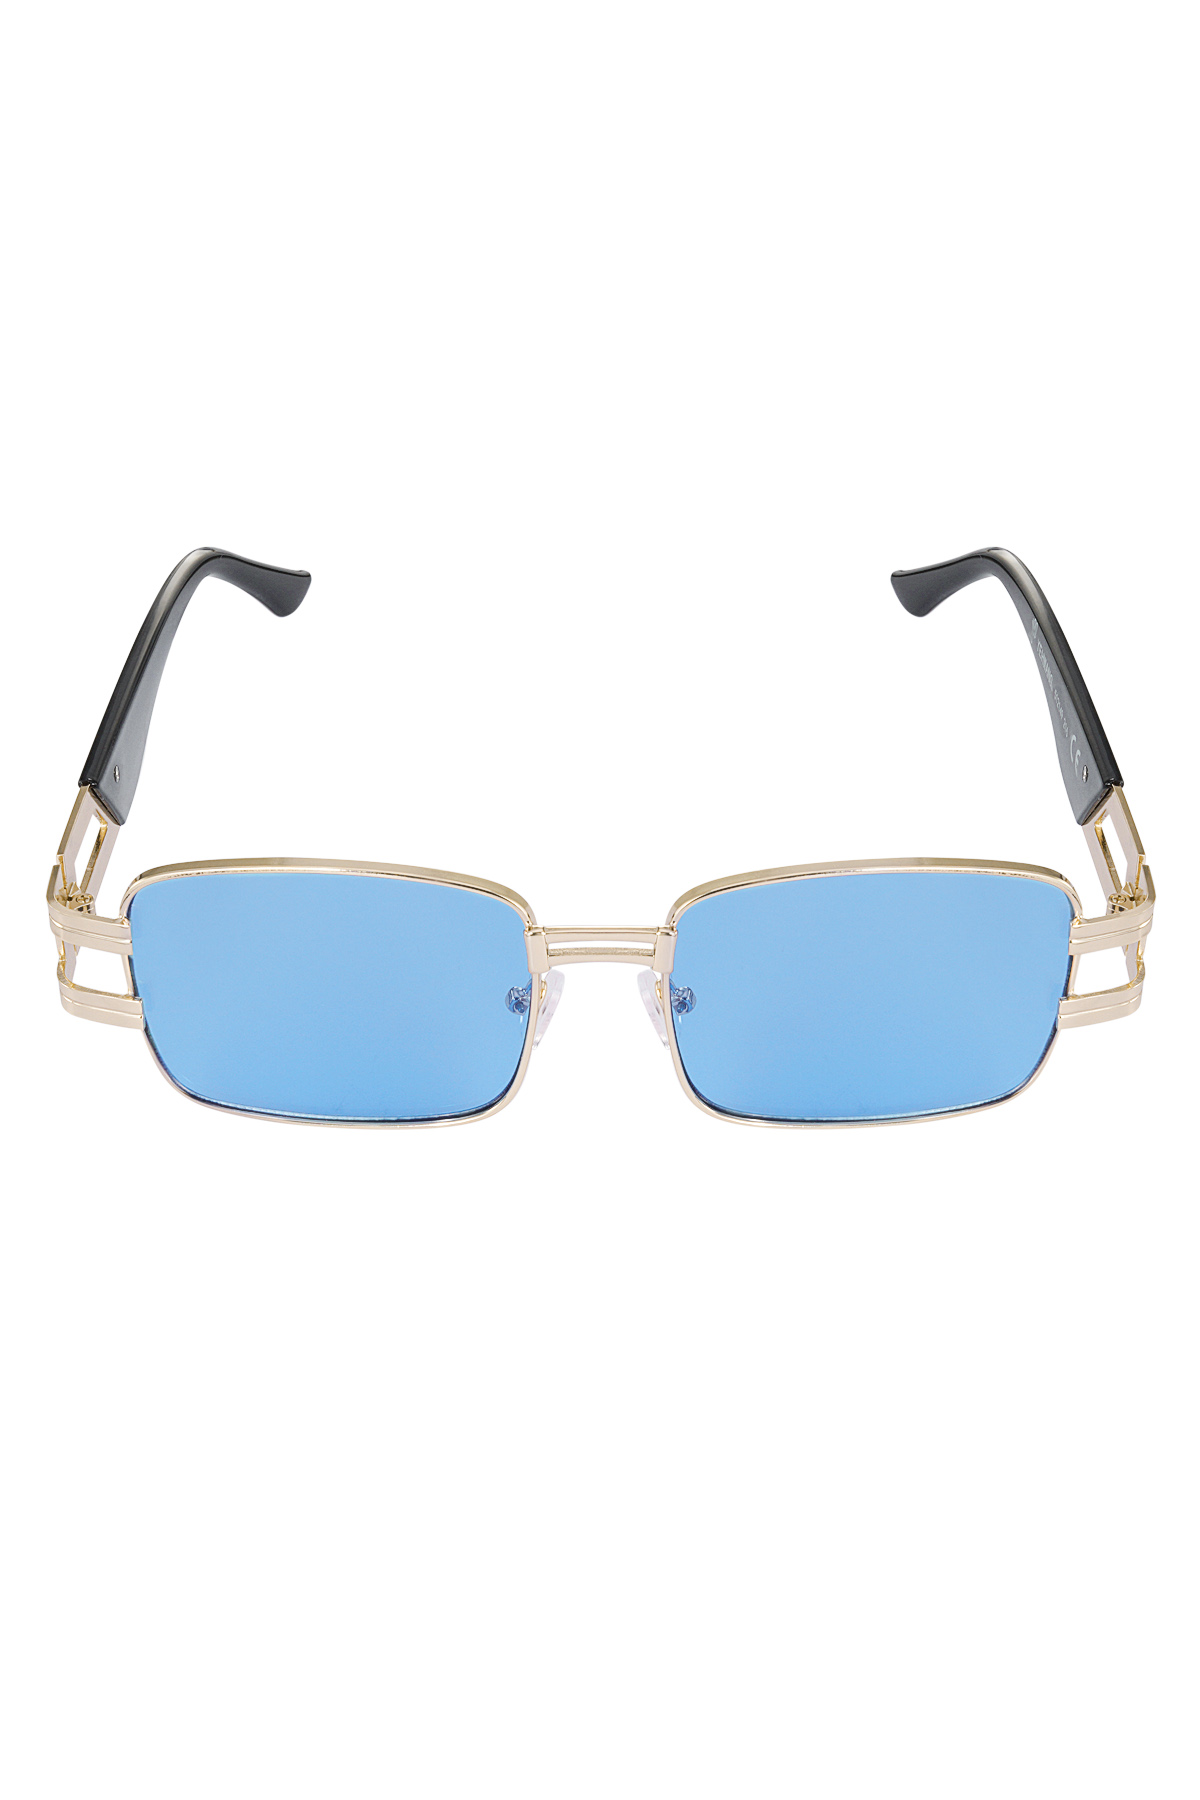 Sunglasses simple metal essential - blue gold h5 Picture4